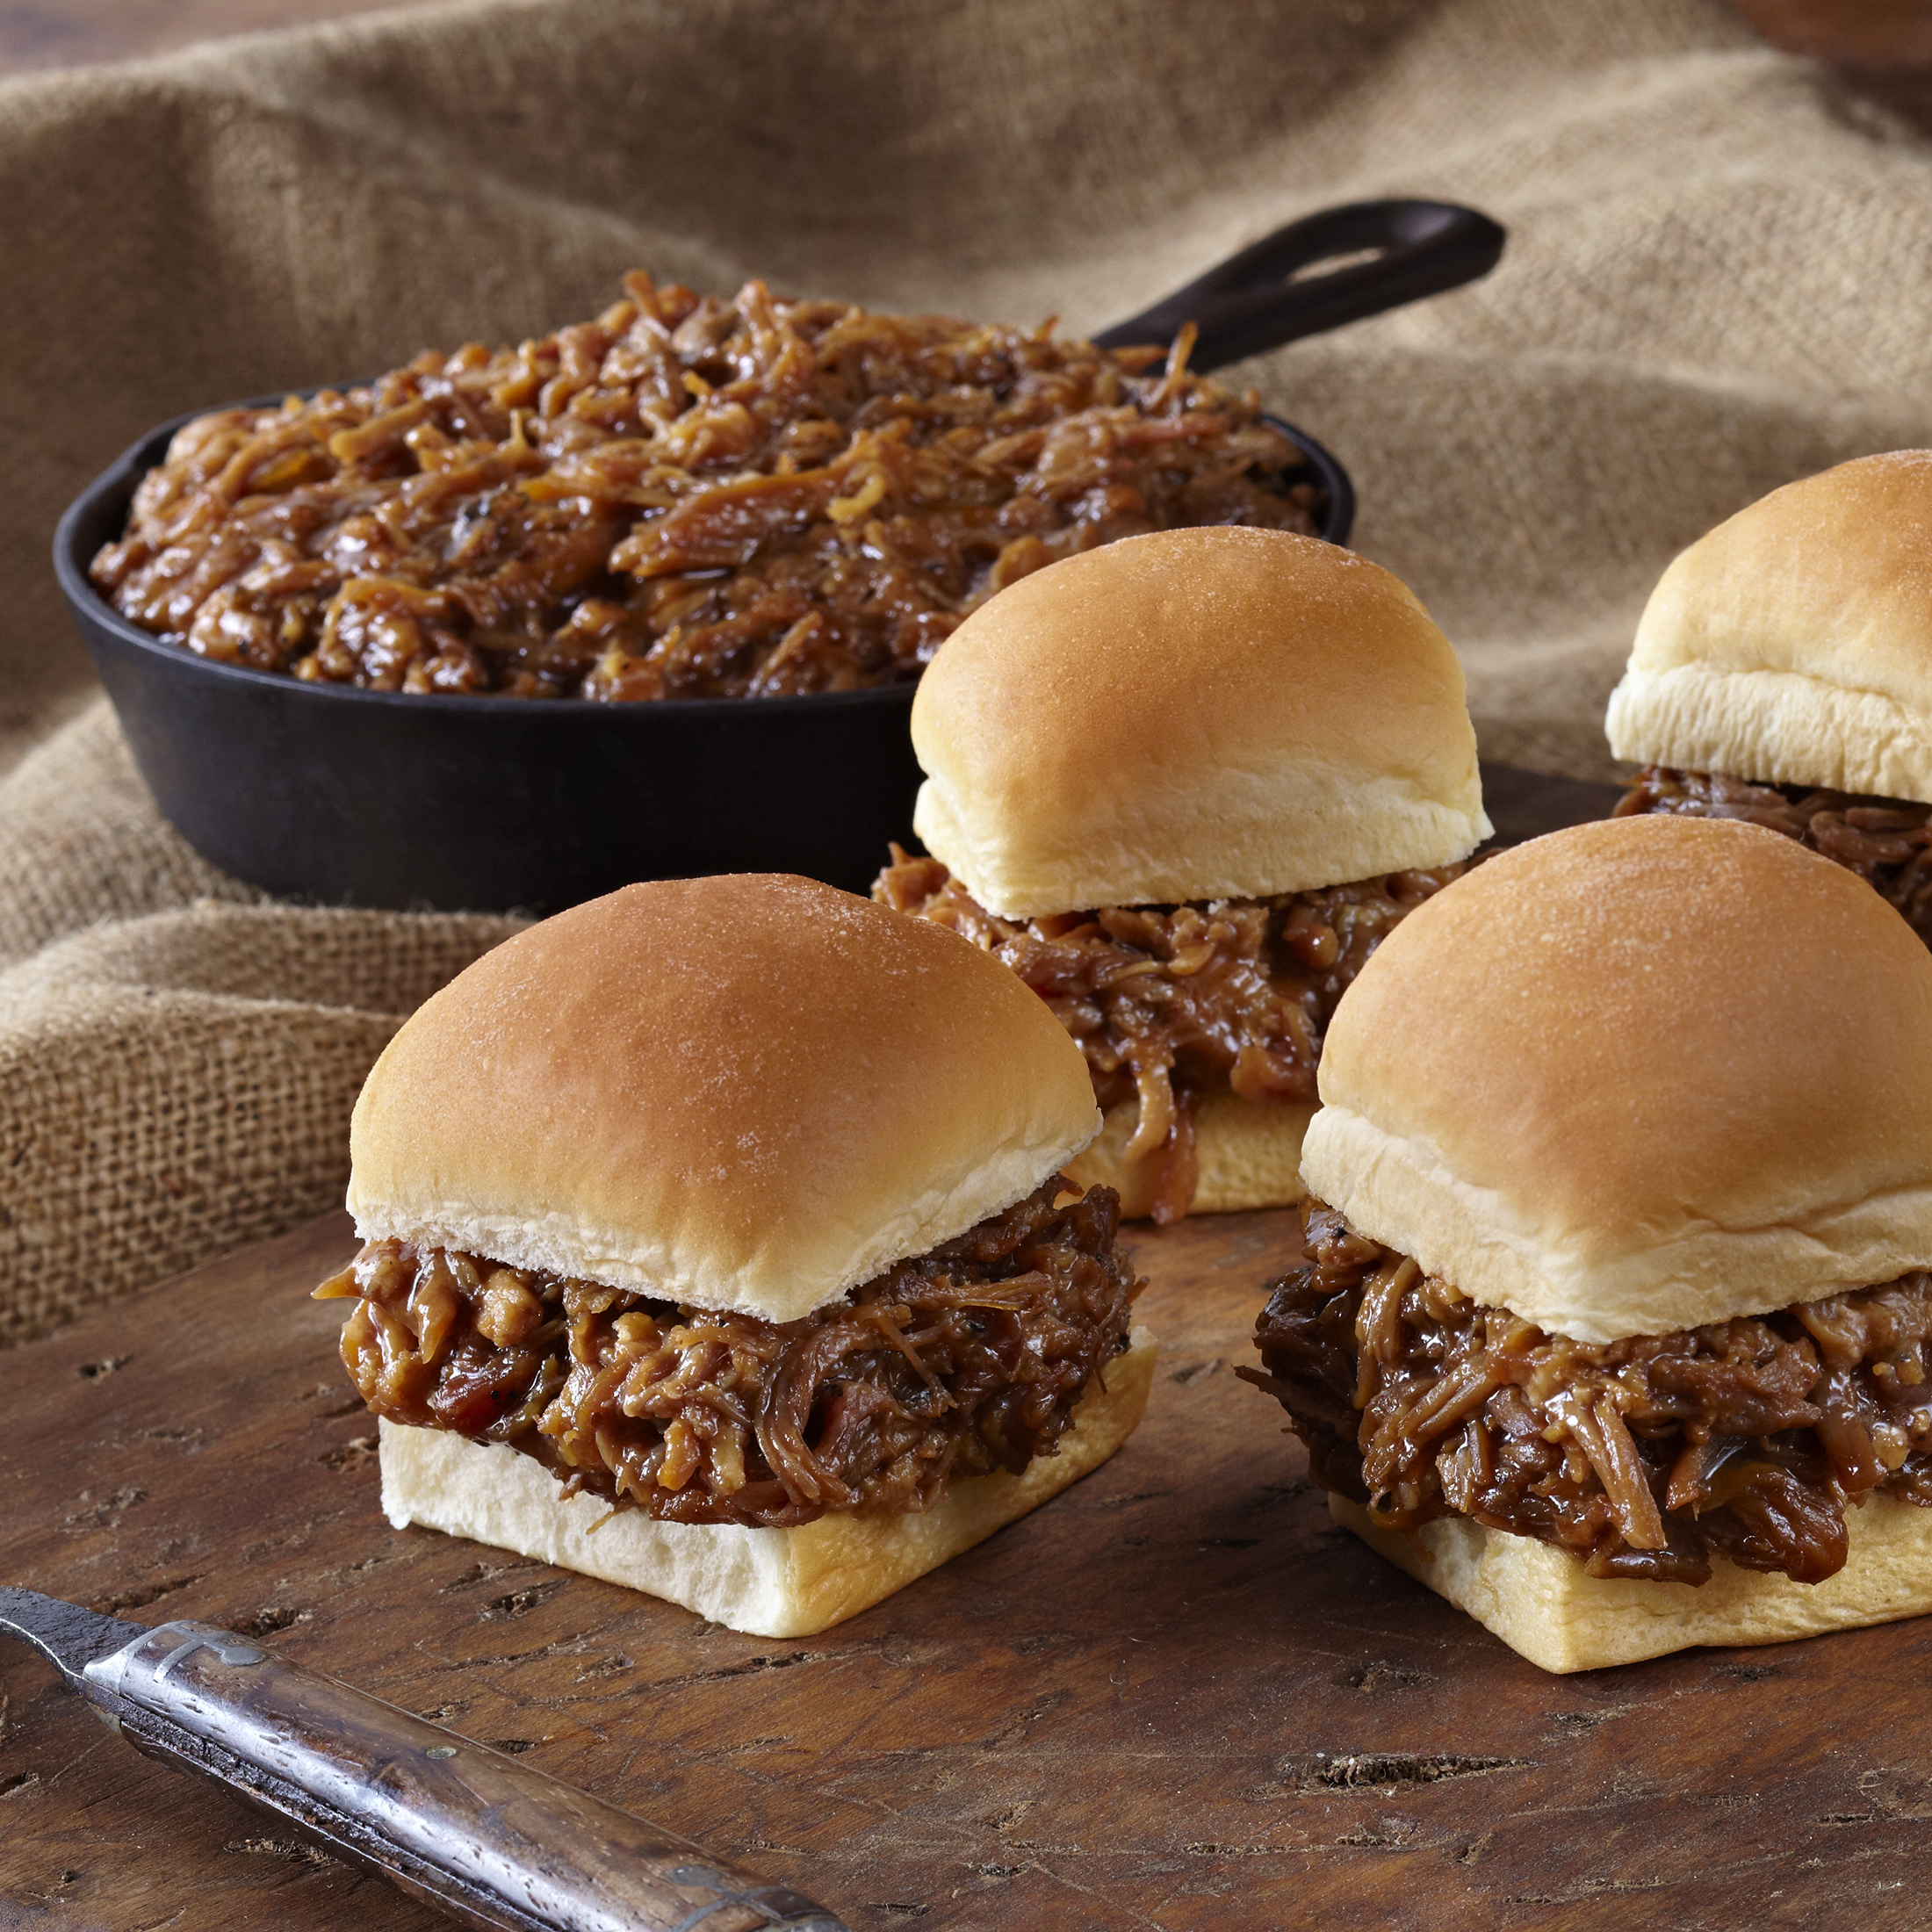 Jack Daniel's Seasoned Pulled Beef, Fully Cooked, Ready to Heat,16 oz Tray (Refrigerated) - image 5 of 13